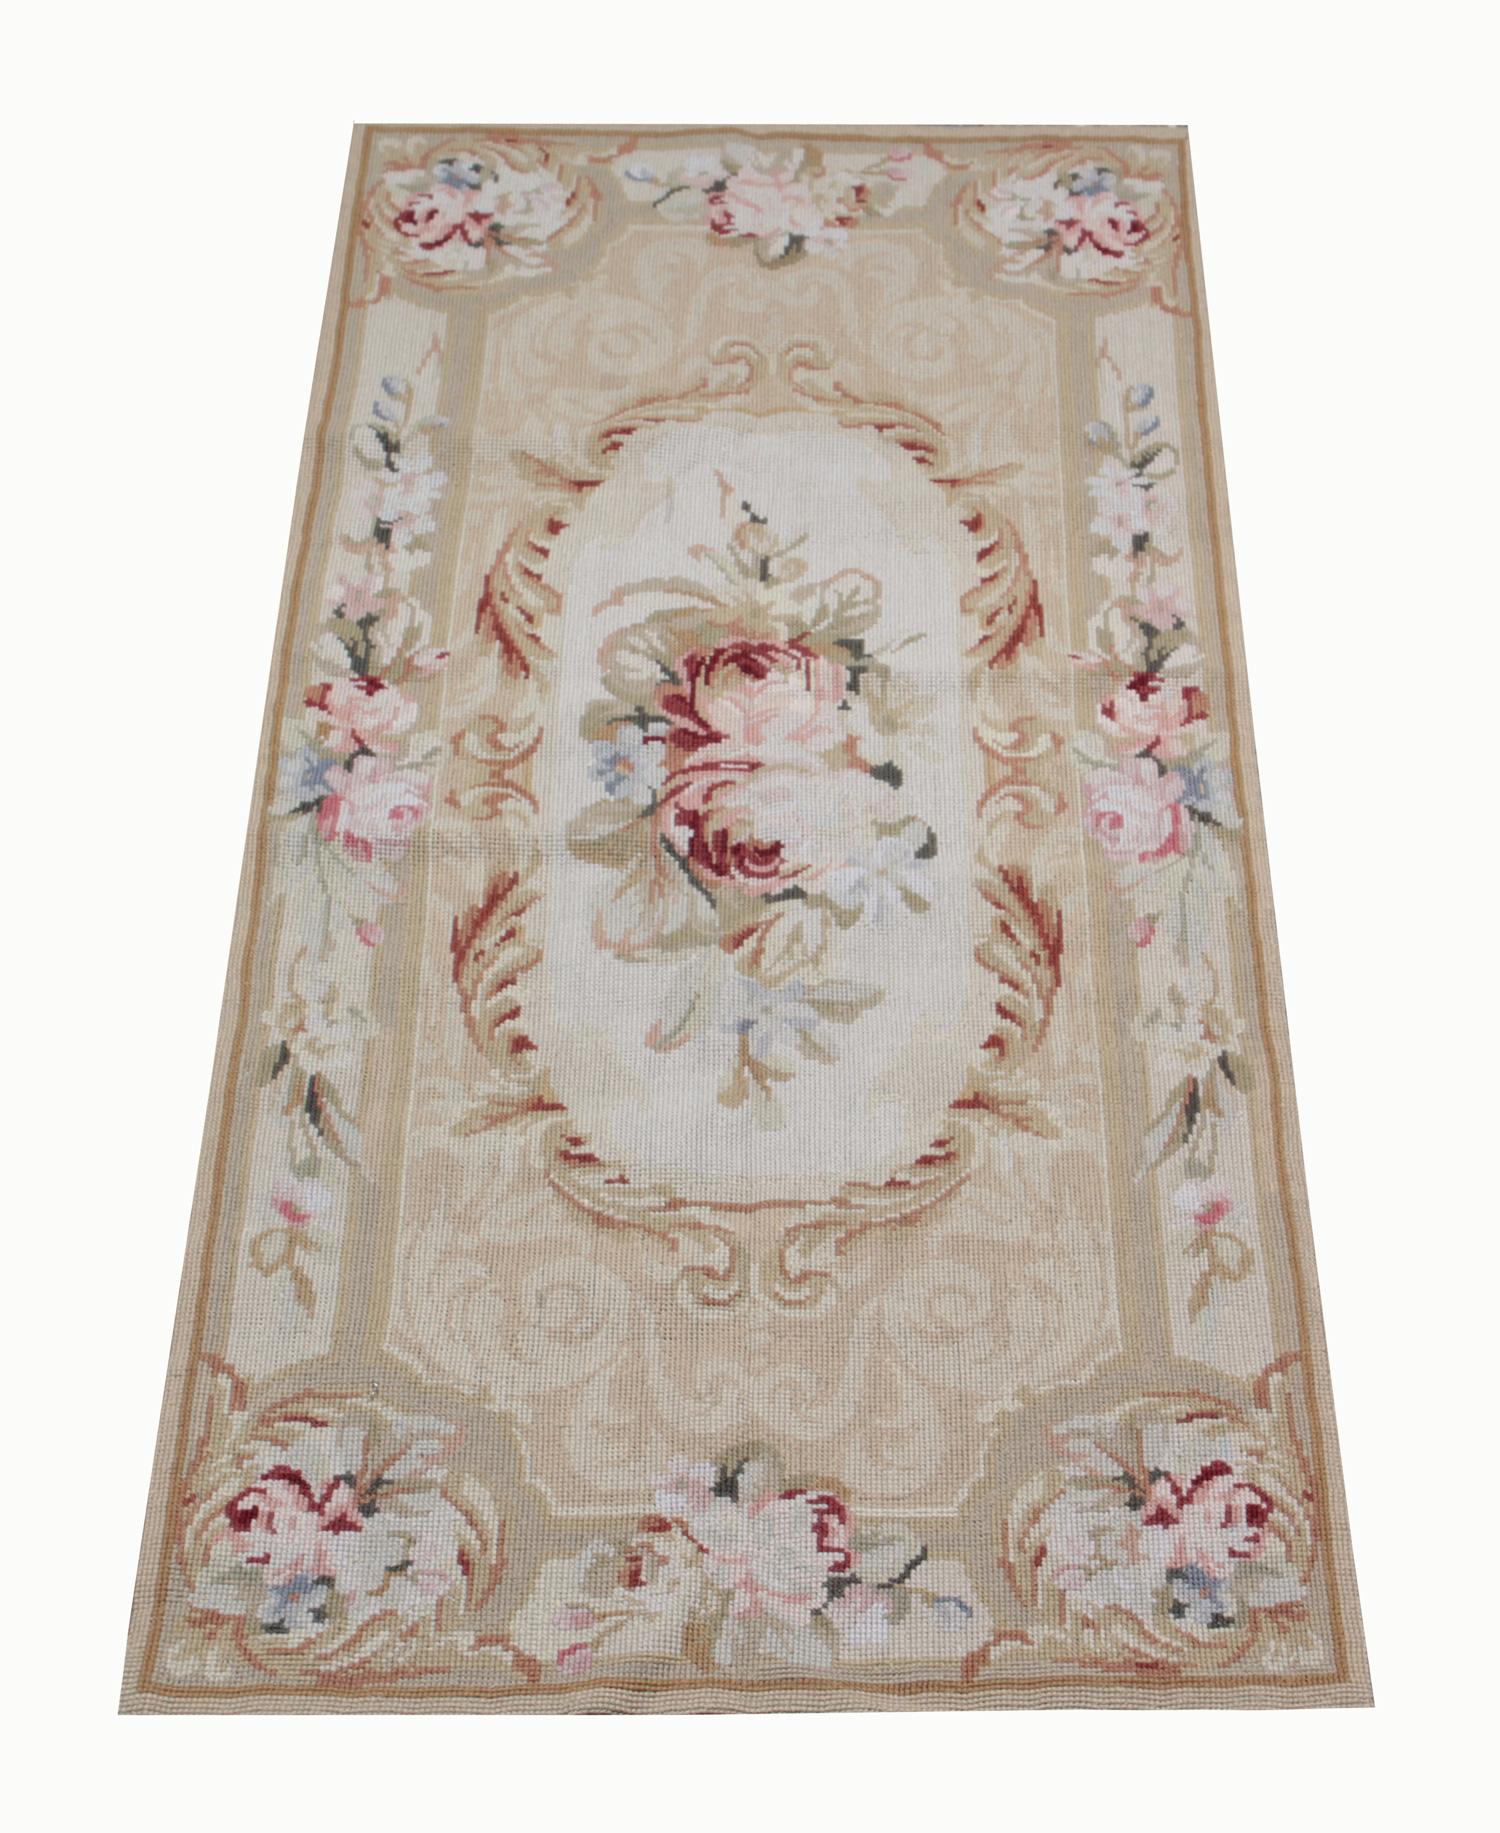 This gold cream rug runner is the very good item as living room rugs and getting most of the attention in rug store by clients because of the color and design. These handmade elegant Chinese Aubusson floor rugs has The soft shade of colors. these